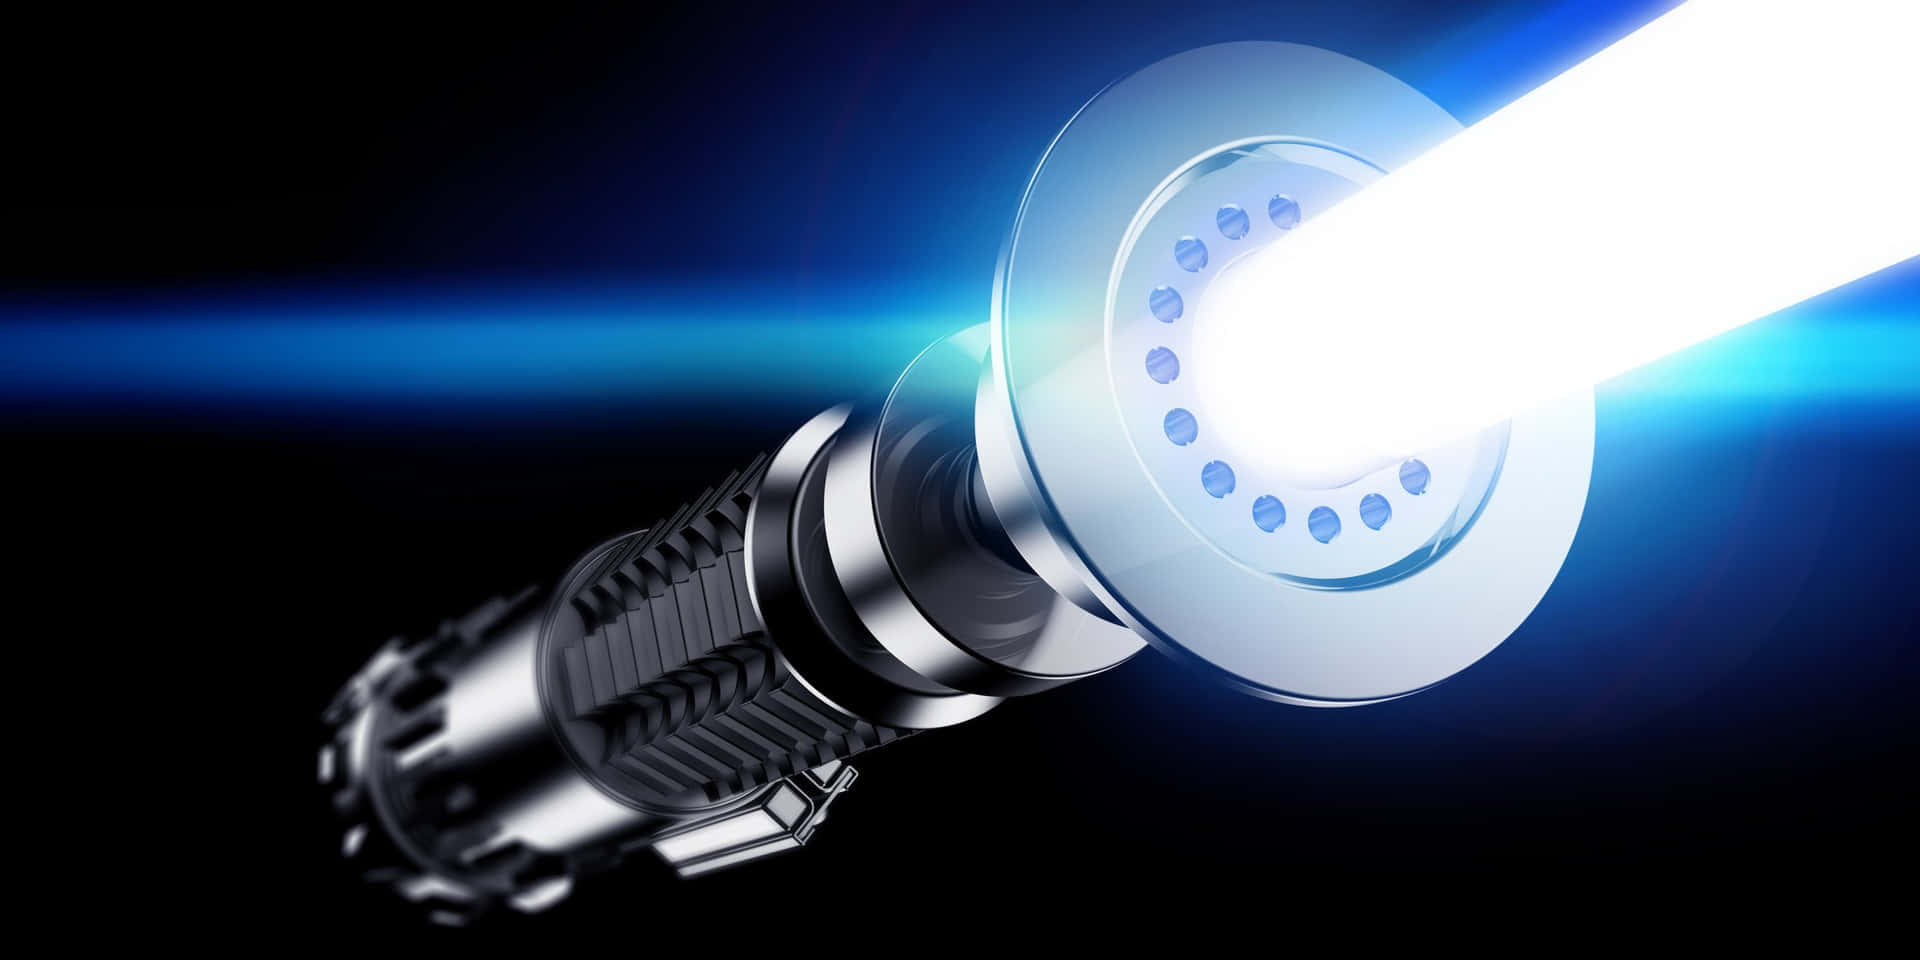 A professional-grade LED flashlight, perfect for night-time activities